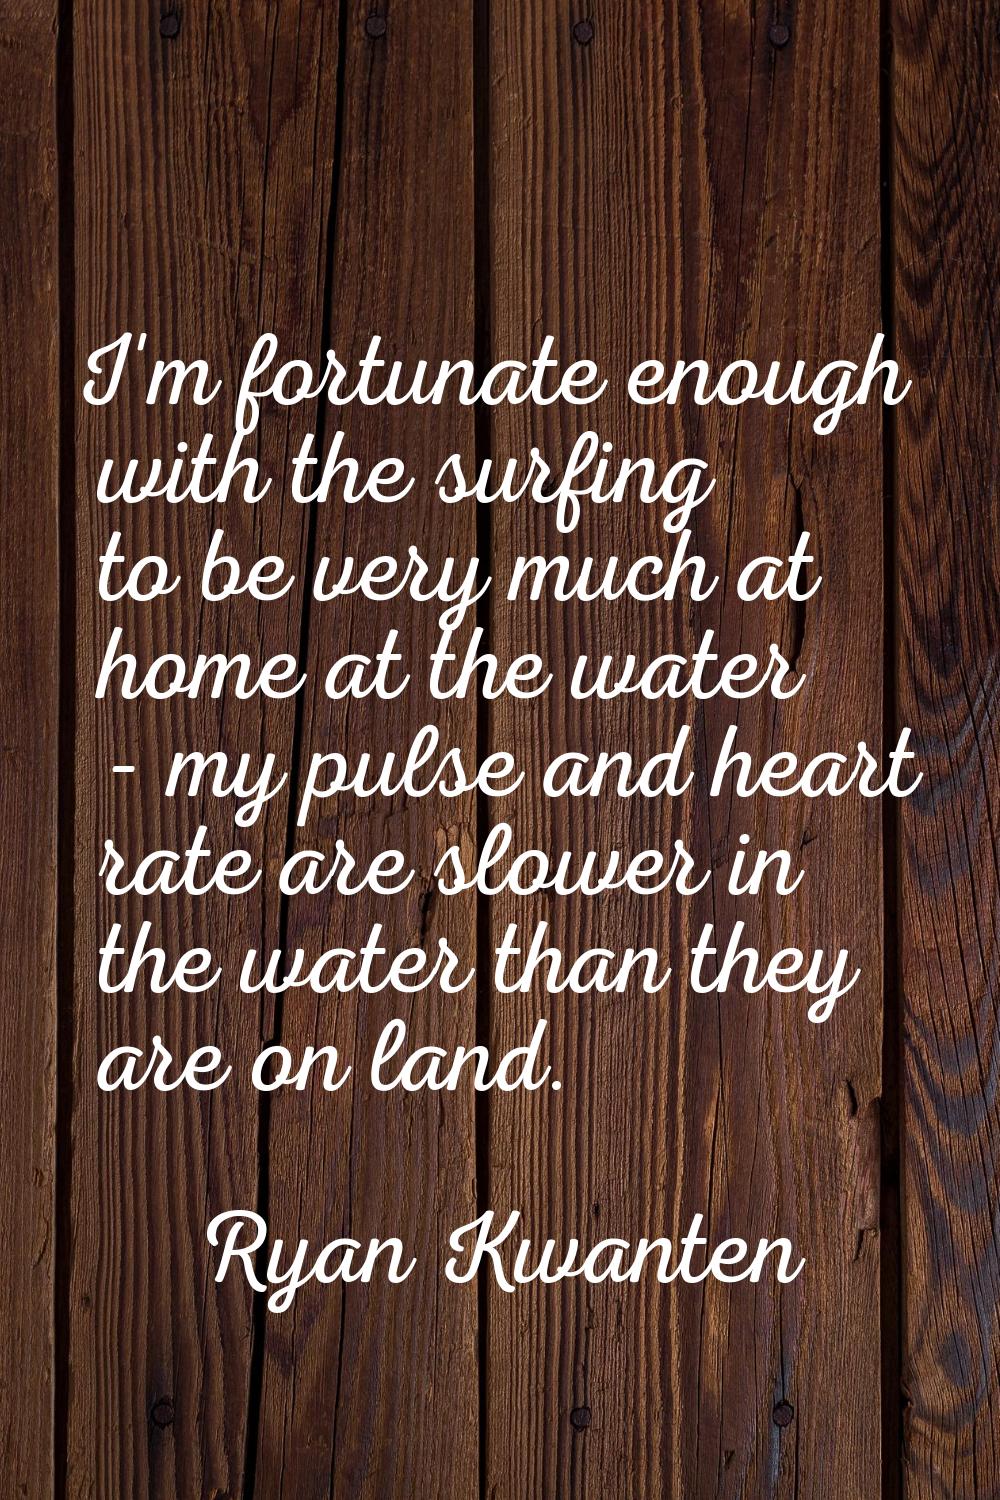 I'm fortunate enough with the surfing to be very much at home at the water - my pulse and heart rat